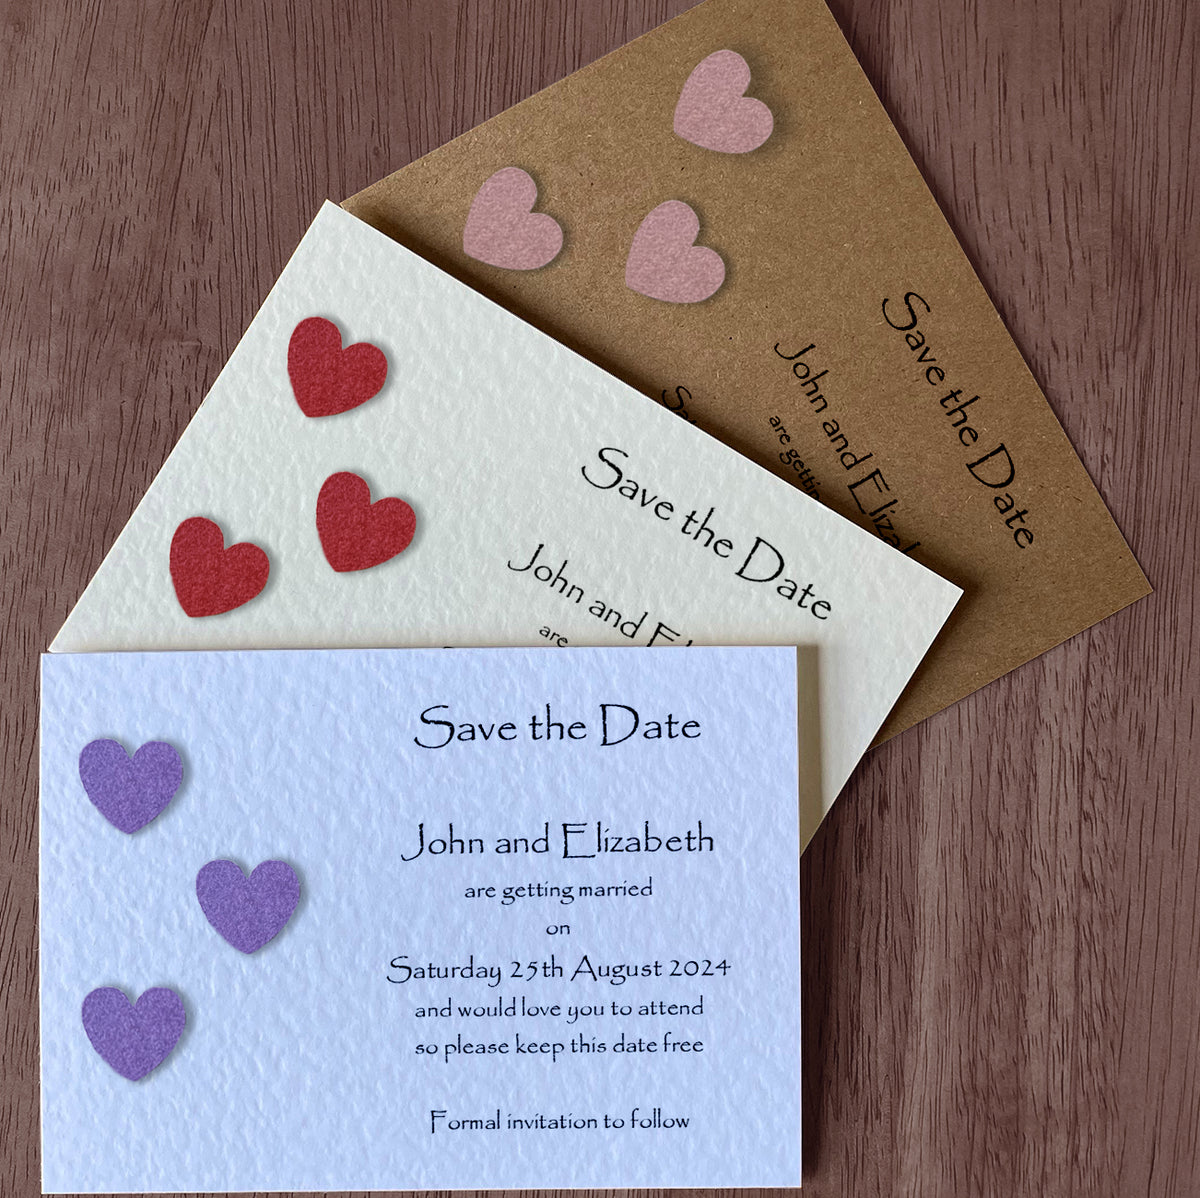 Shop Cheap 89¢ Save the Date Cards